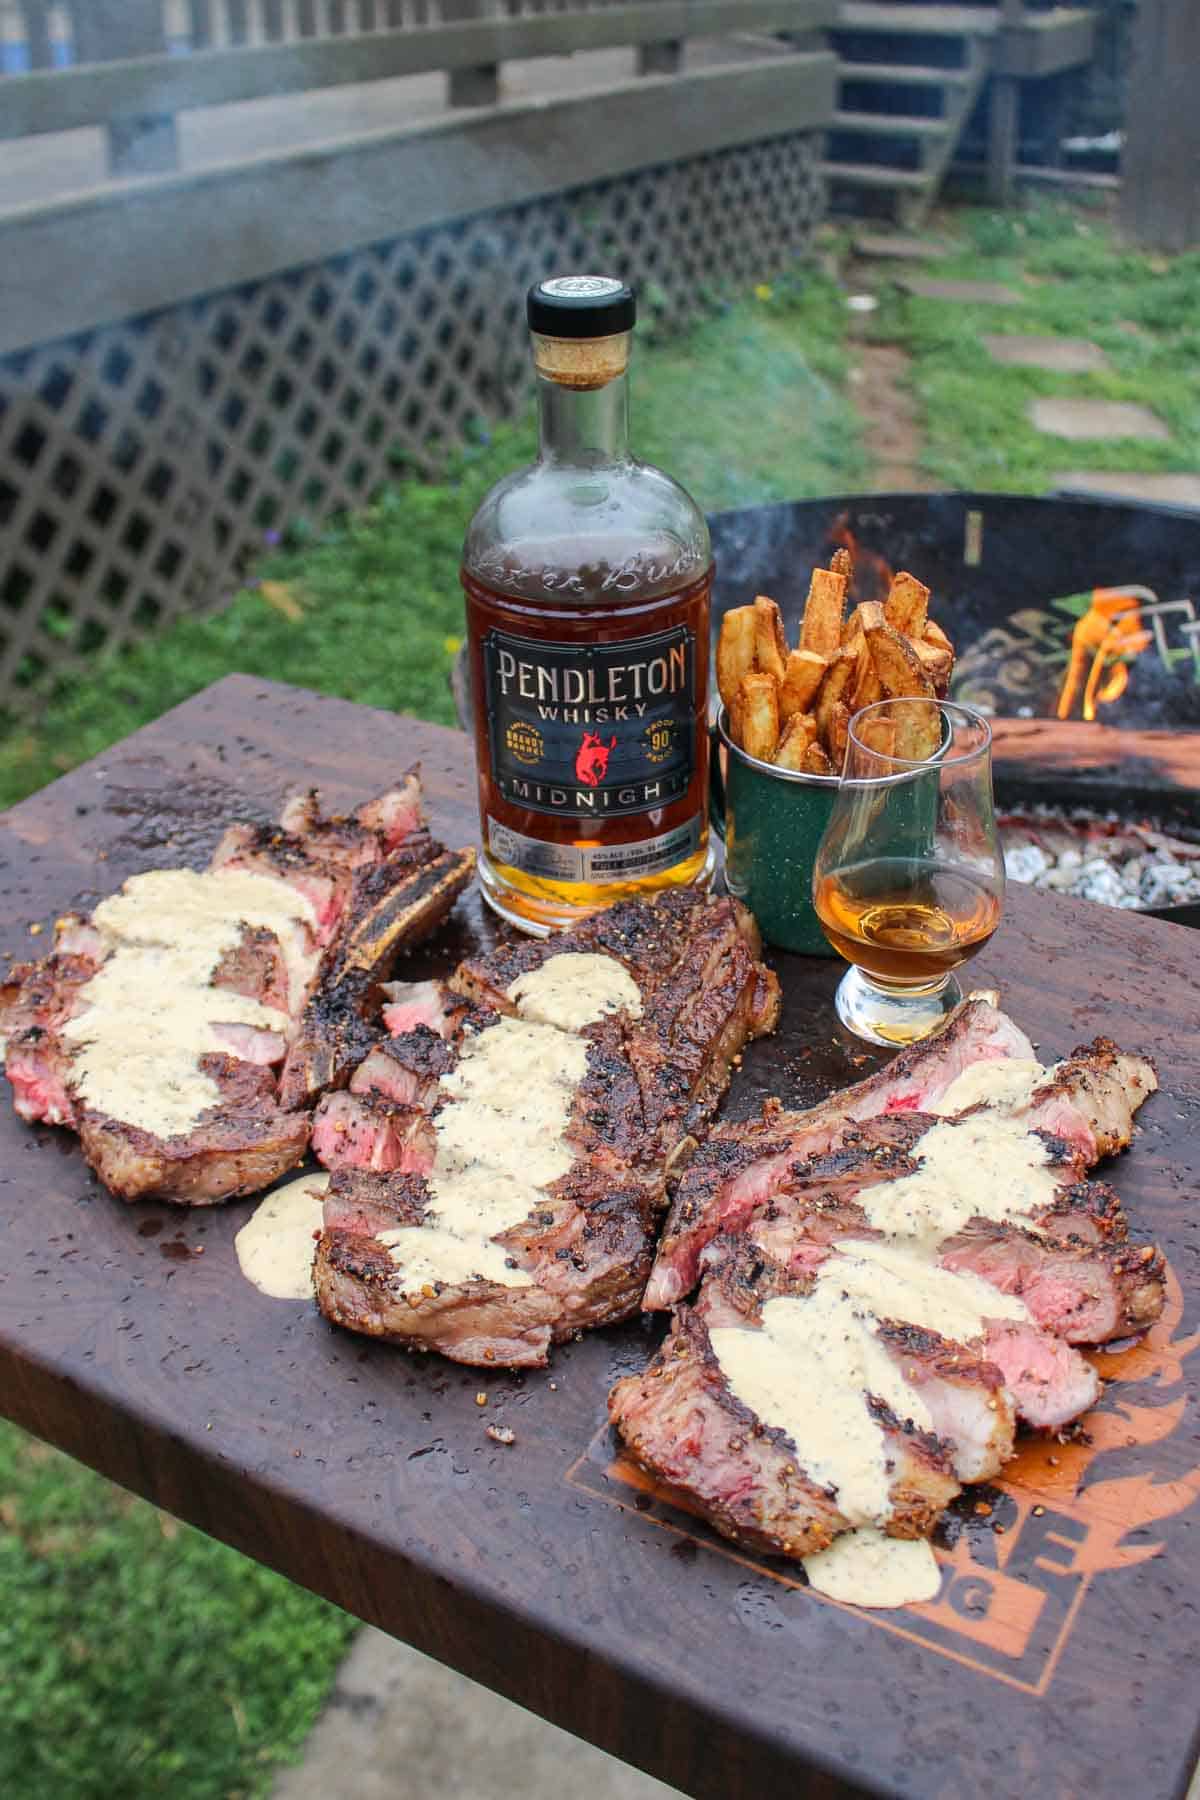 Steak with Peppercorn Cream Sauce and Pendleton Midnight Whisky served up.